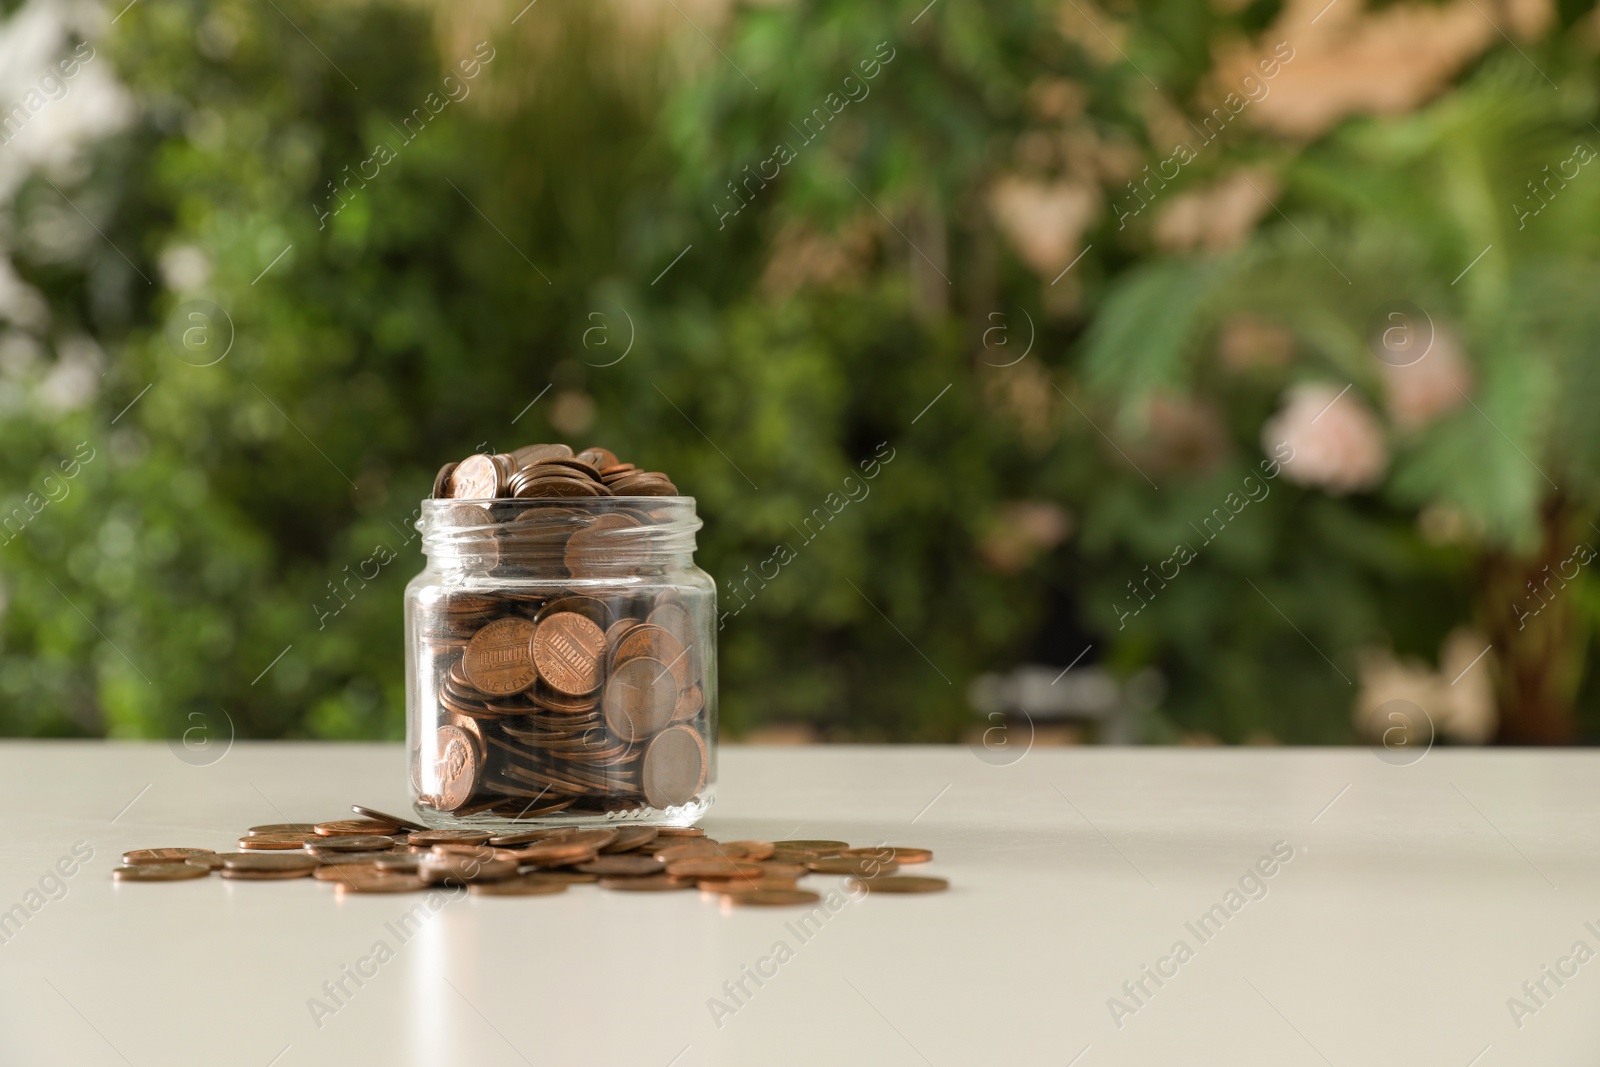 Photo of Donation jar with coins on table against blurred background. Space for text